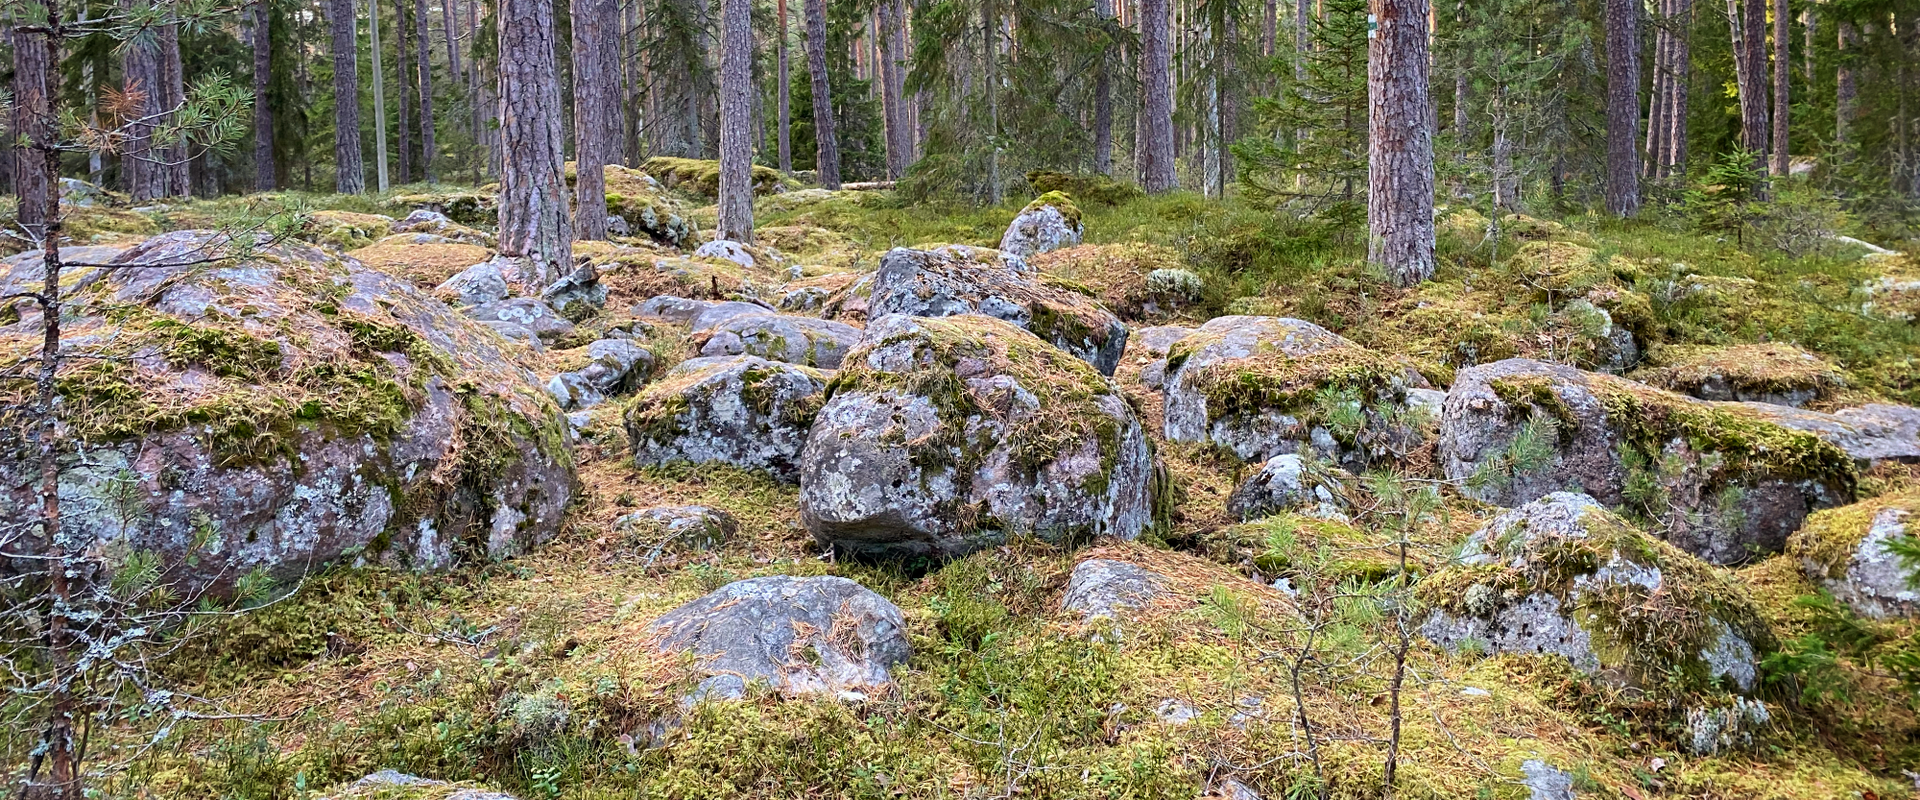 Hidden away amongst the trees towards one end of the village of Käsmu is Estonias biggest field of boulders: massive stones, the biggest standing 4.8 